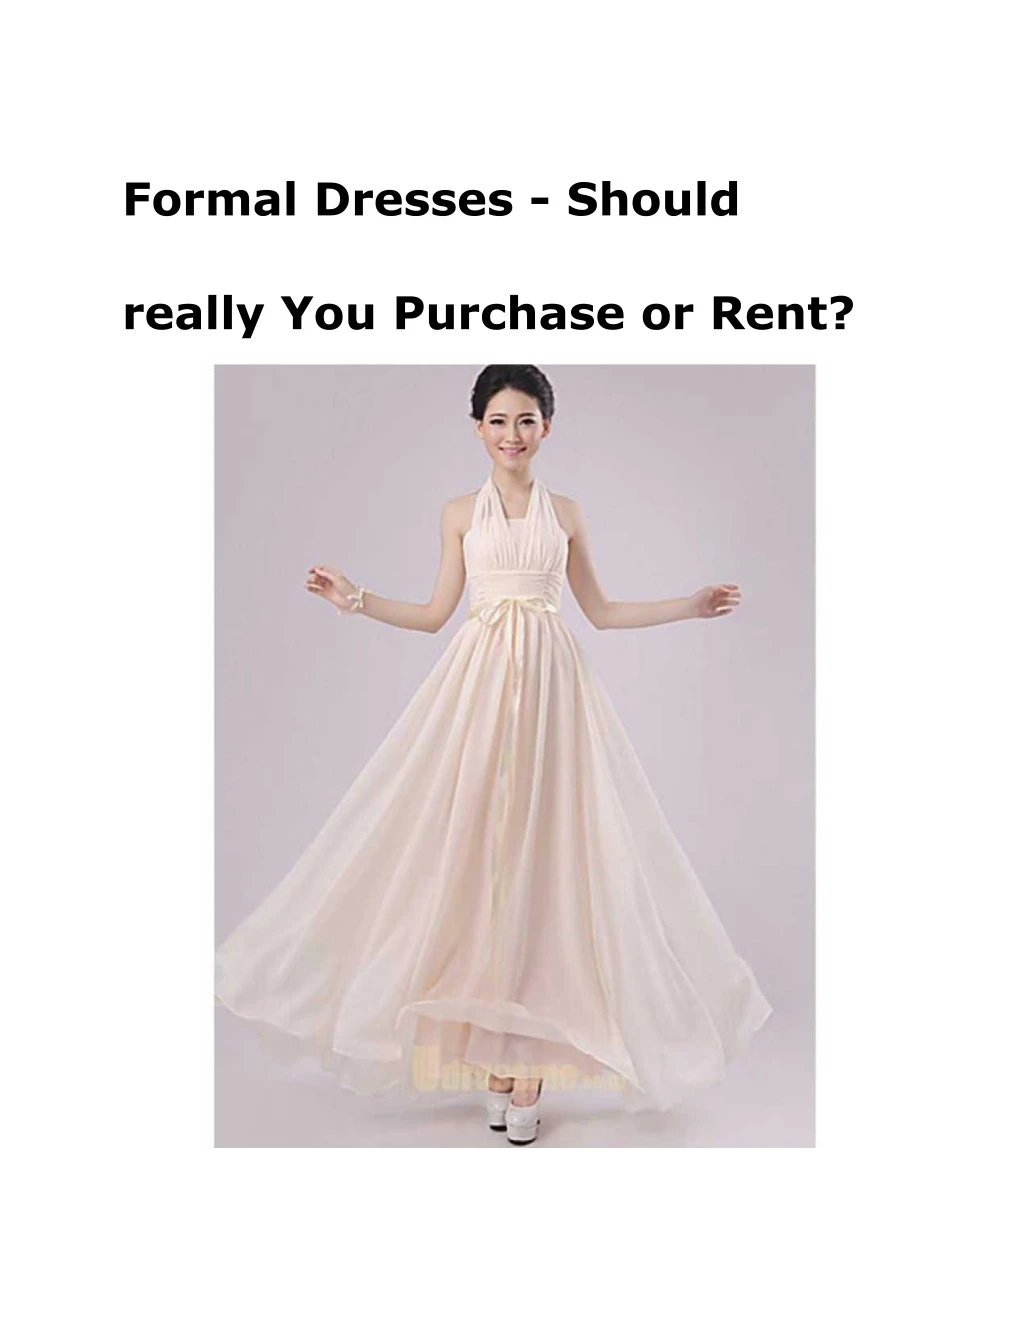 formal dresses should really you purchase or rent